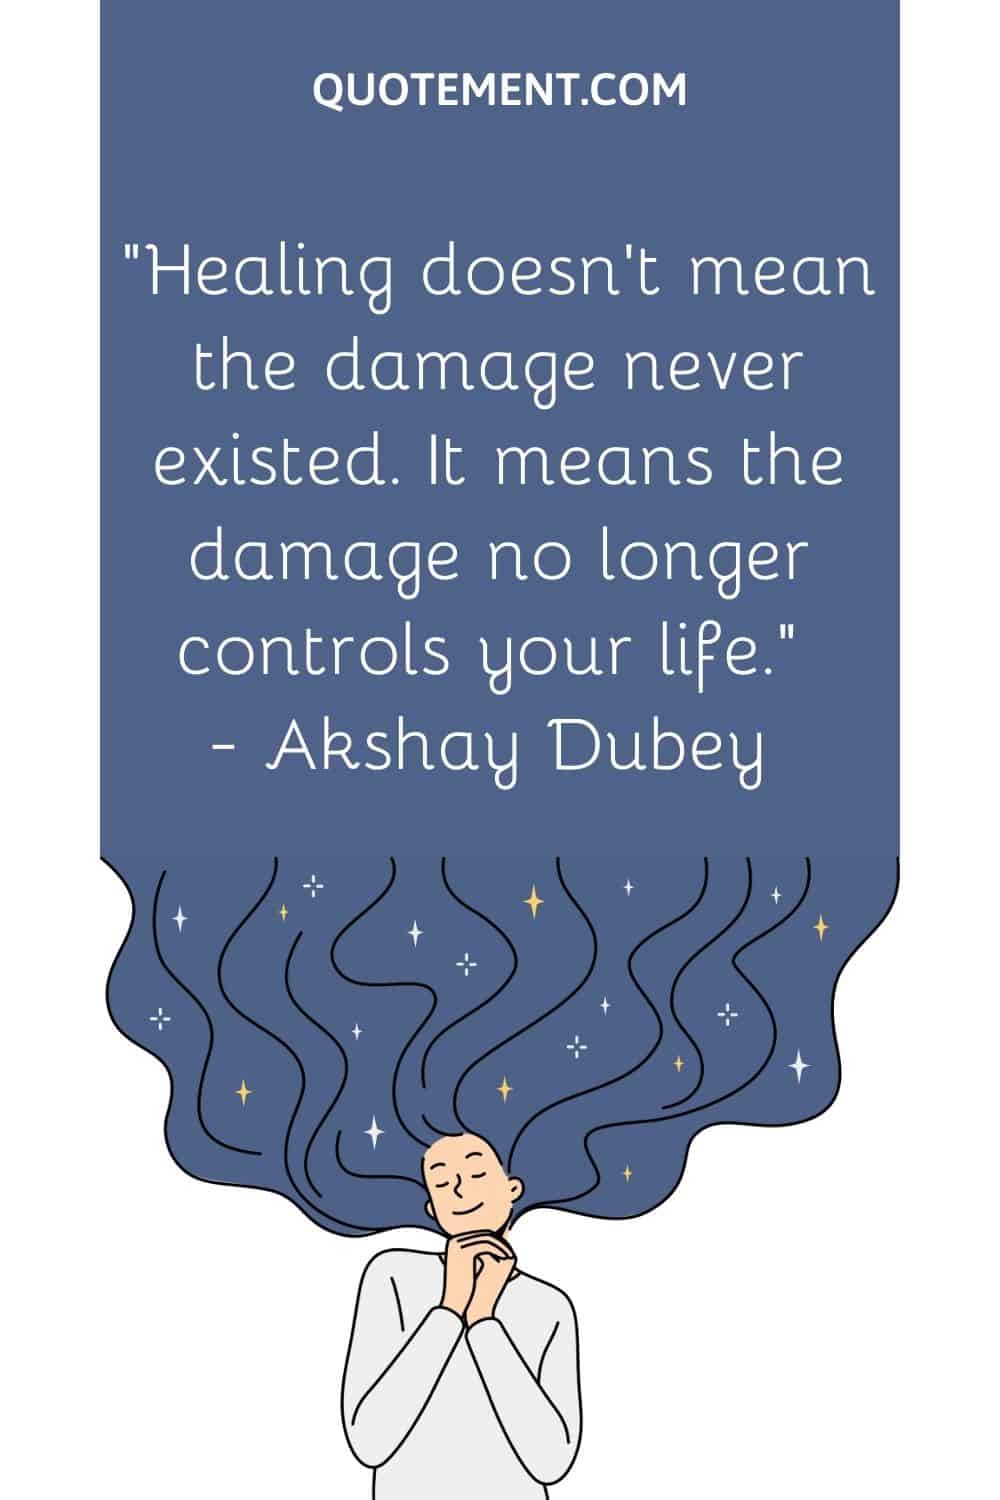 Healing doesn’t mean the damage never existed.